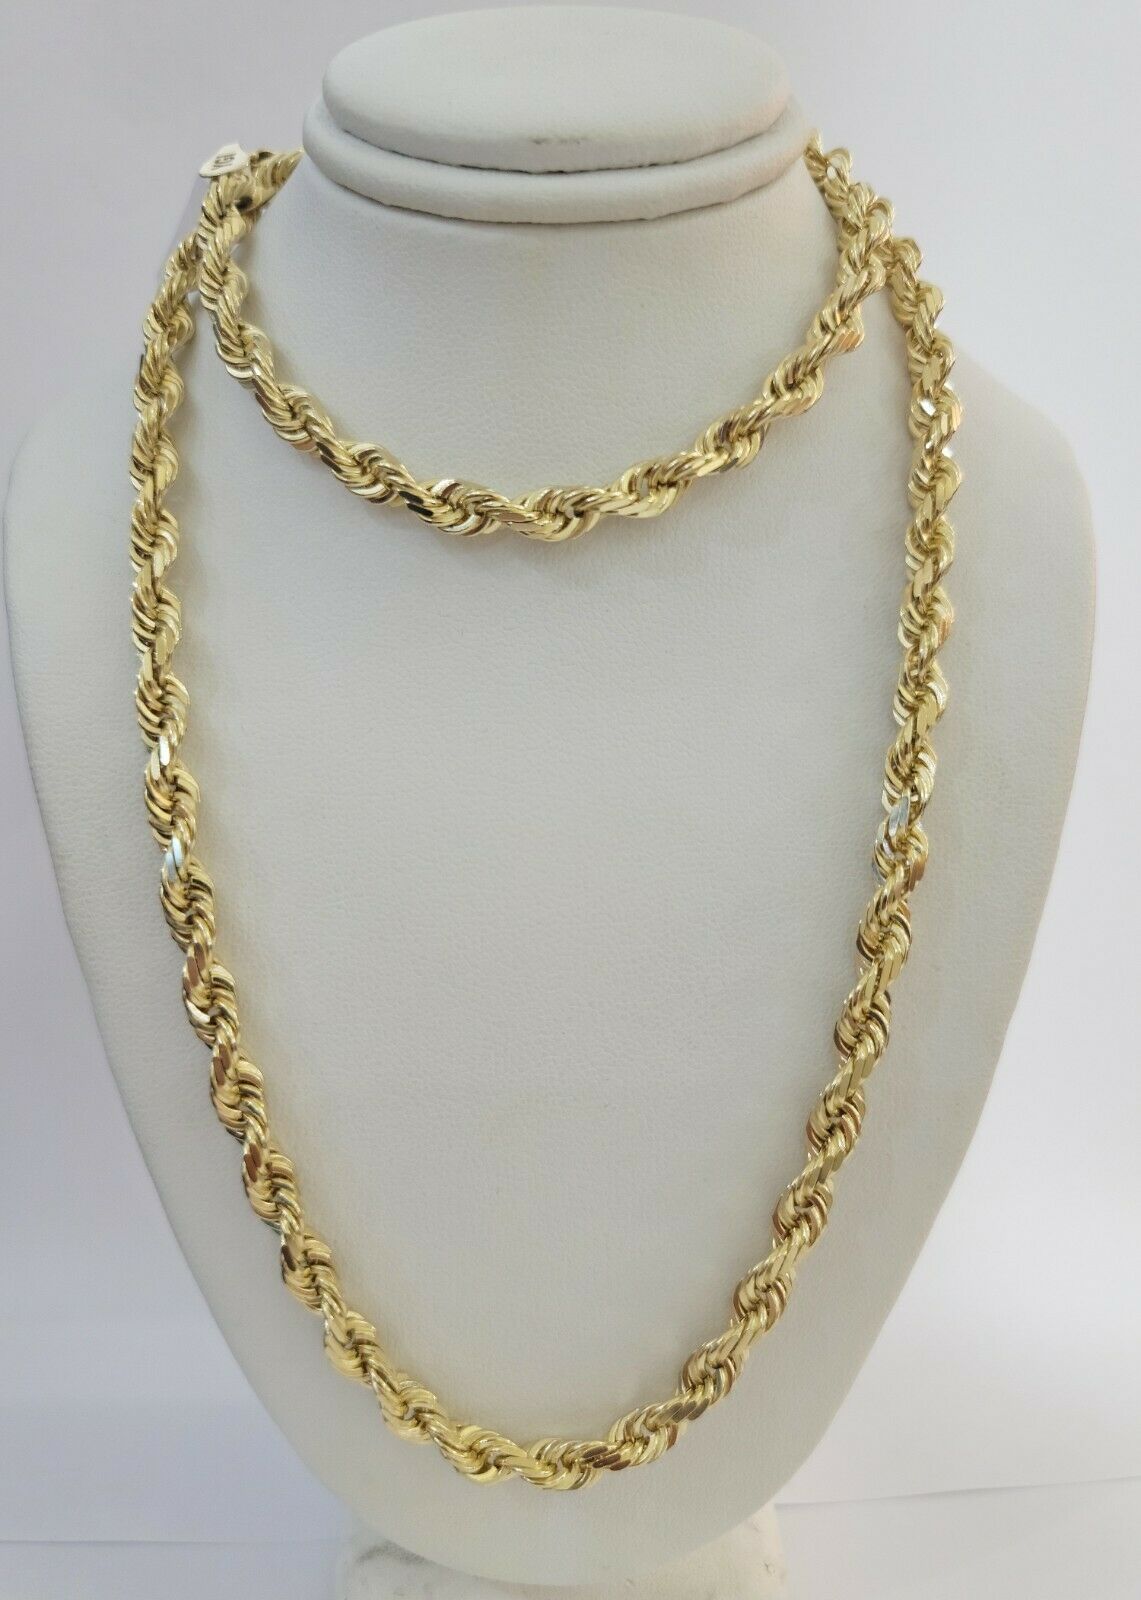 Real 14k gold Rope Chain Solid Necklace 6mm 26" inch Men women, 14kt yellow gold